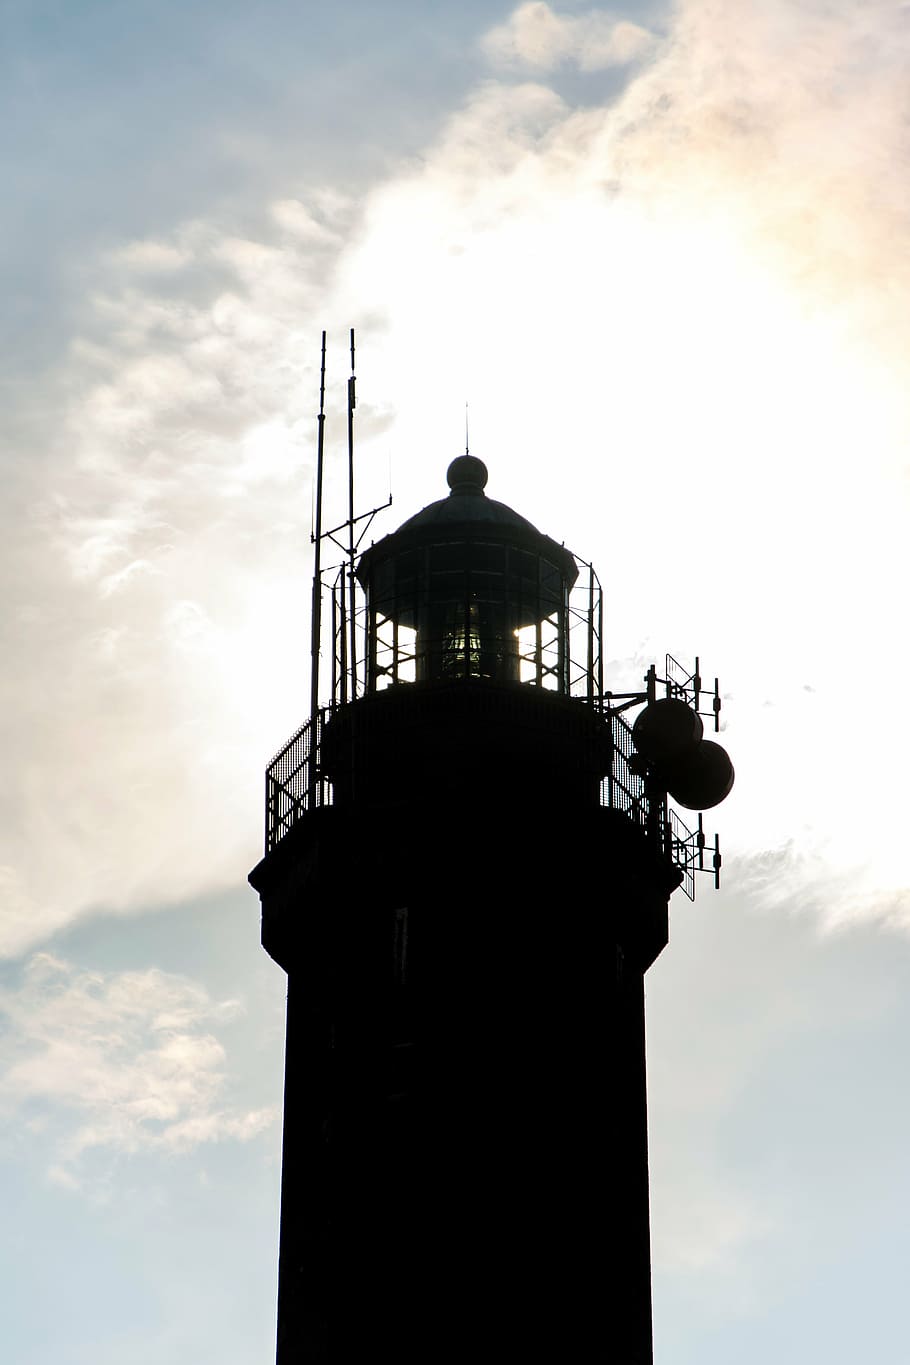 silhouette photo, tower, black, steel, white, cloudy, sky, structures, lighthouse, clouds